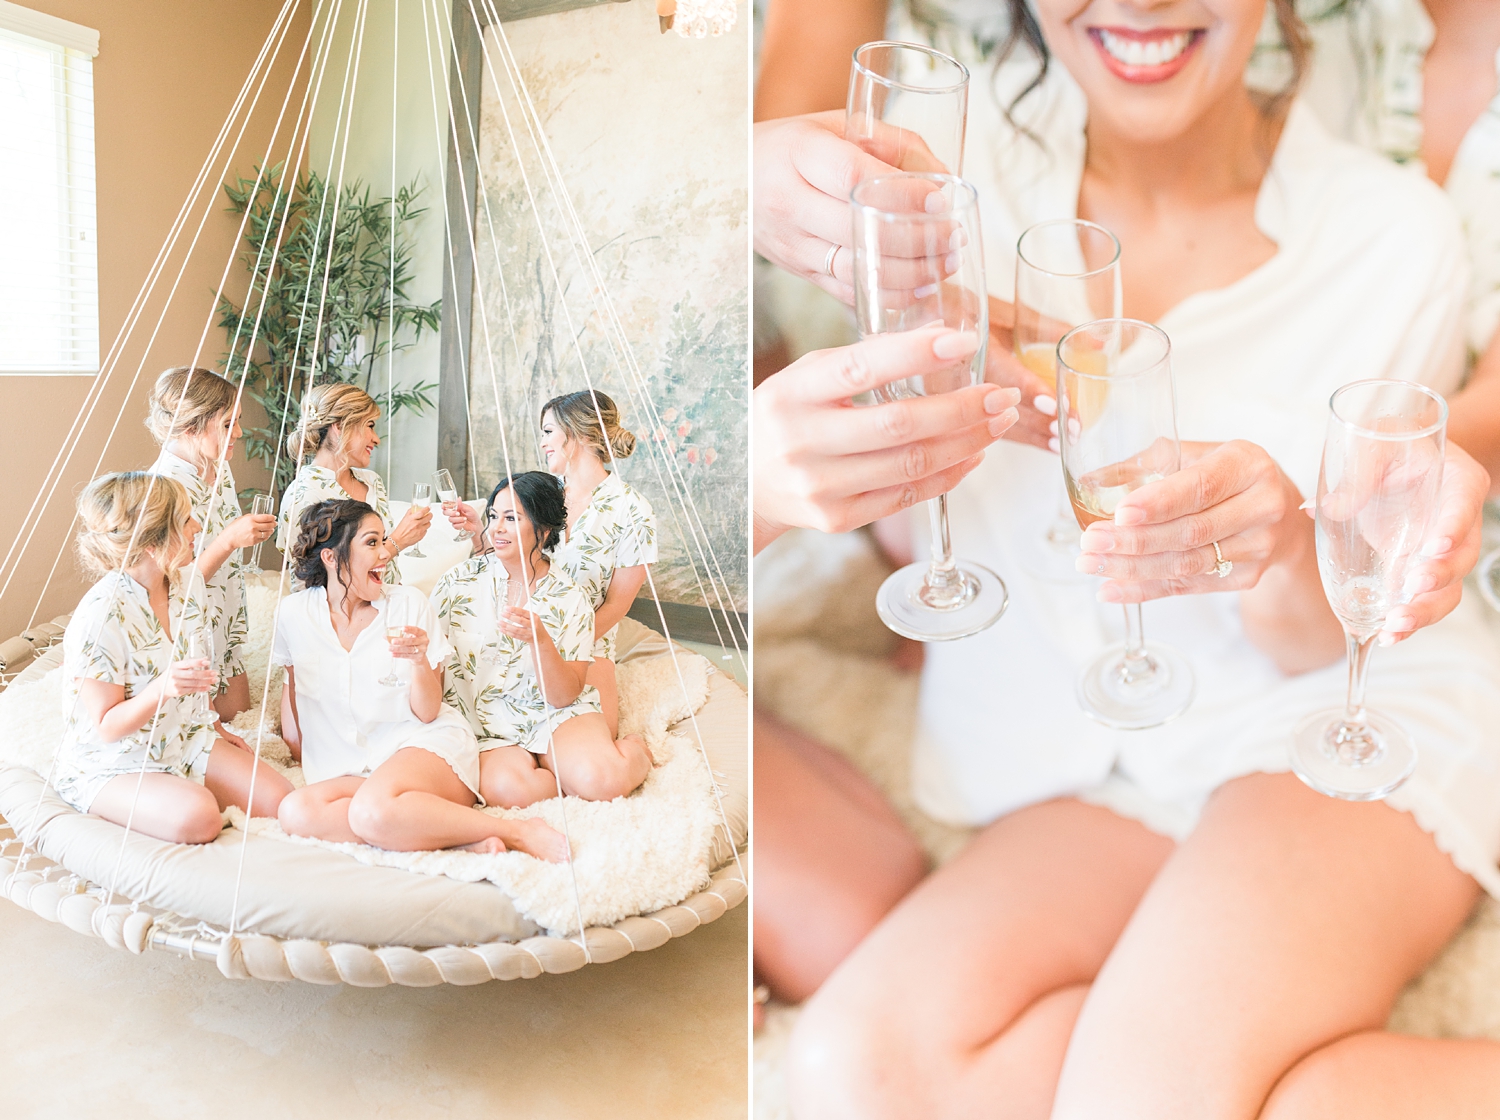 Bridesmaid toasting with champagne while getting ready / bridal party photos